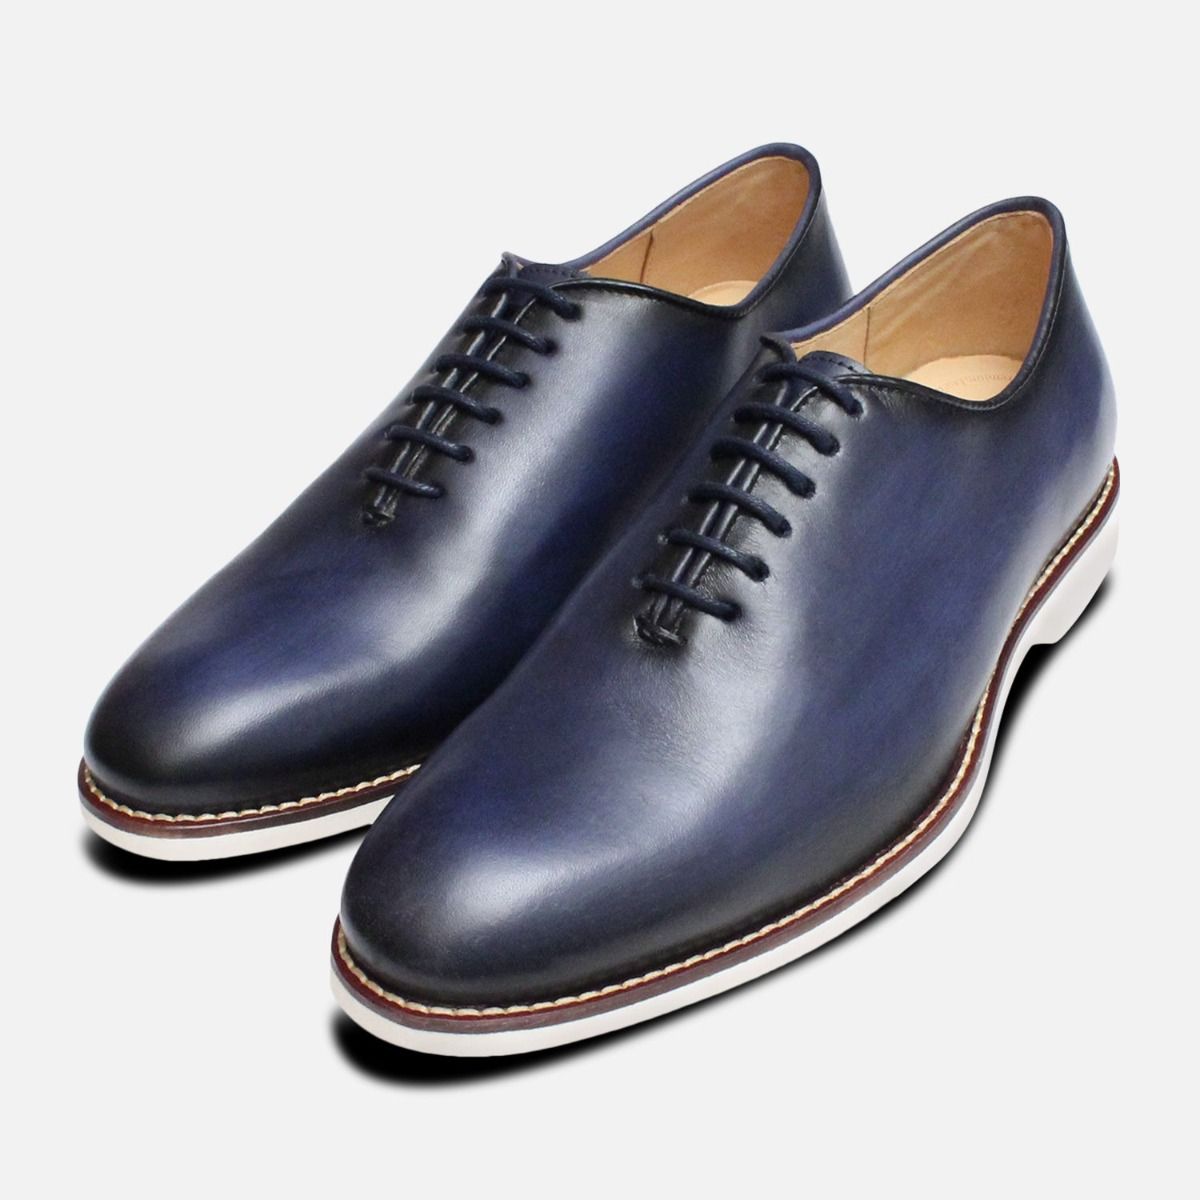 Navy Blue Wholecut Oxford Shoes by 